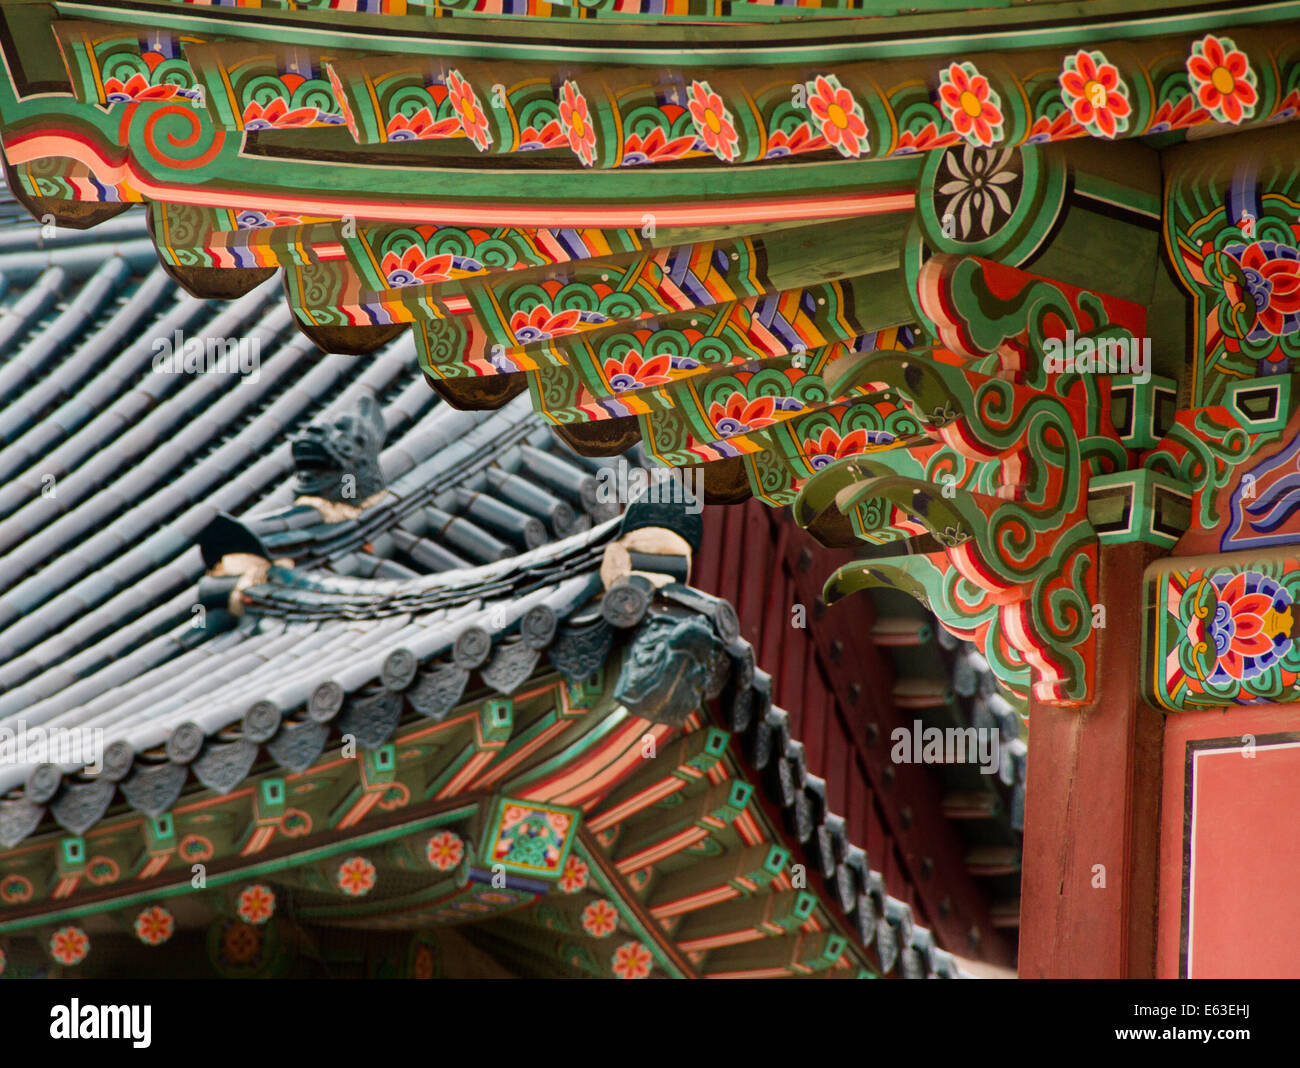 Changdeokgung Palace, in the South Korean capital Seoul Stock Photo